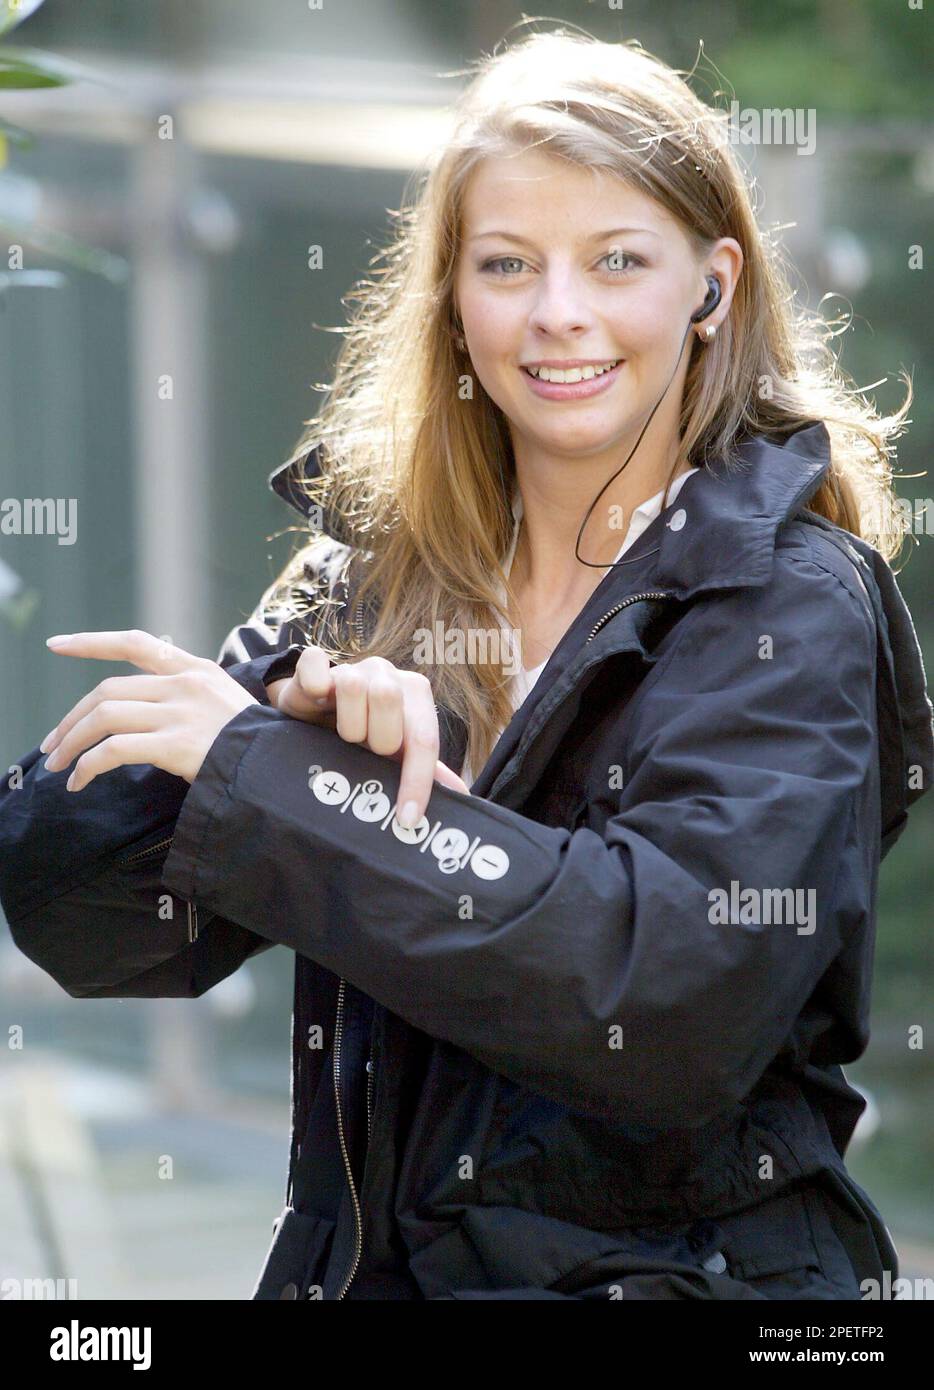 Model Naike displays the latest jacket from German label Rosner with  integrated mp3 and cell phone technology on Monday, July 26, 2004 in  Duesseldorf, Germany. The mp3blue jacket will be presented at